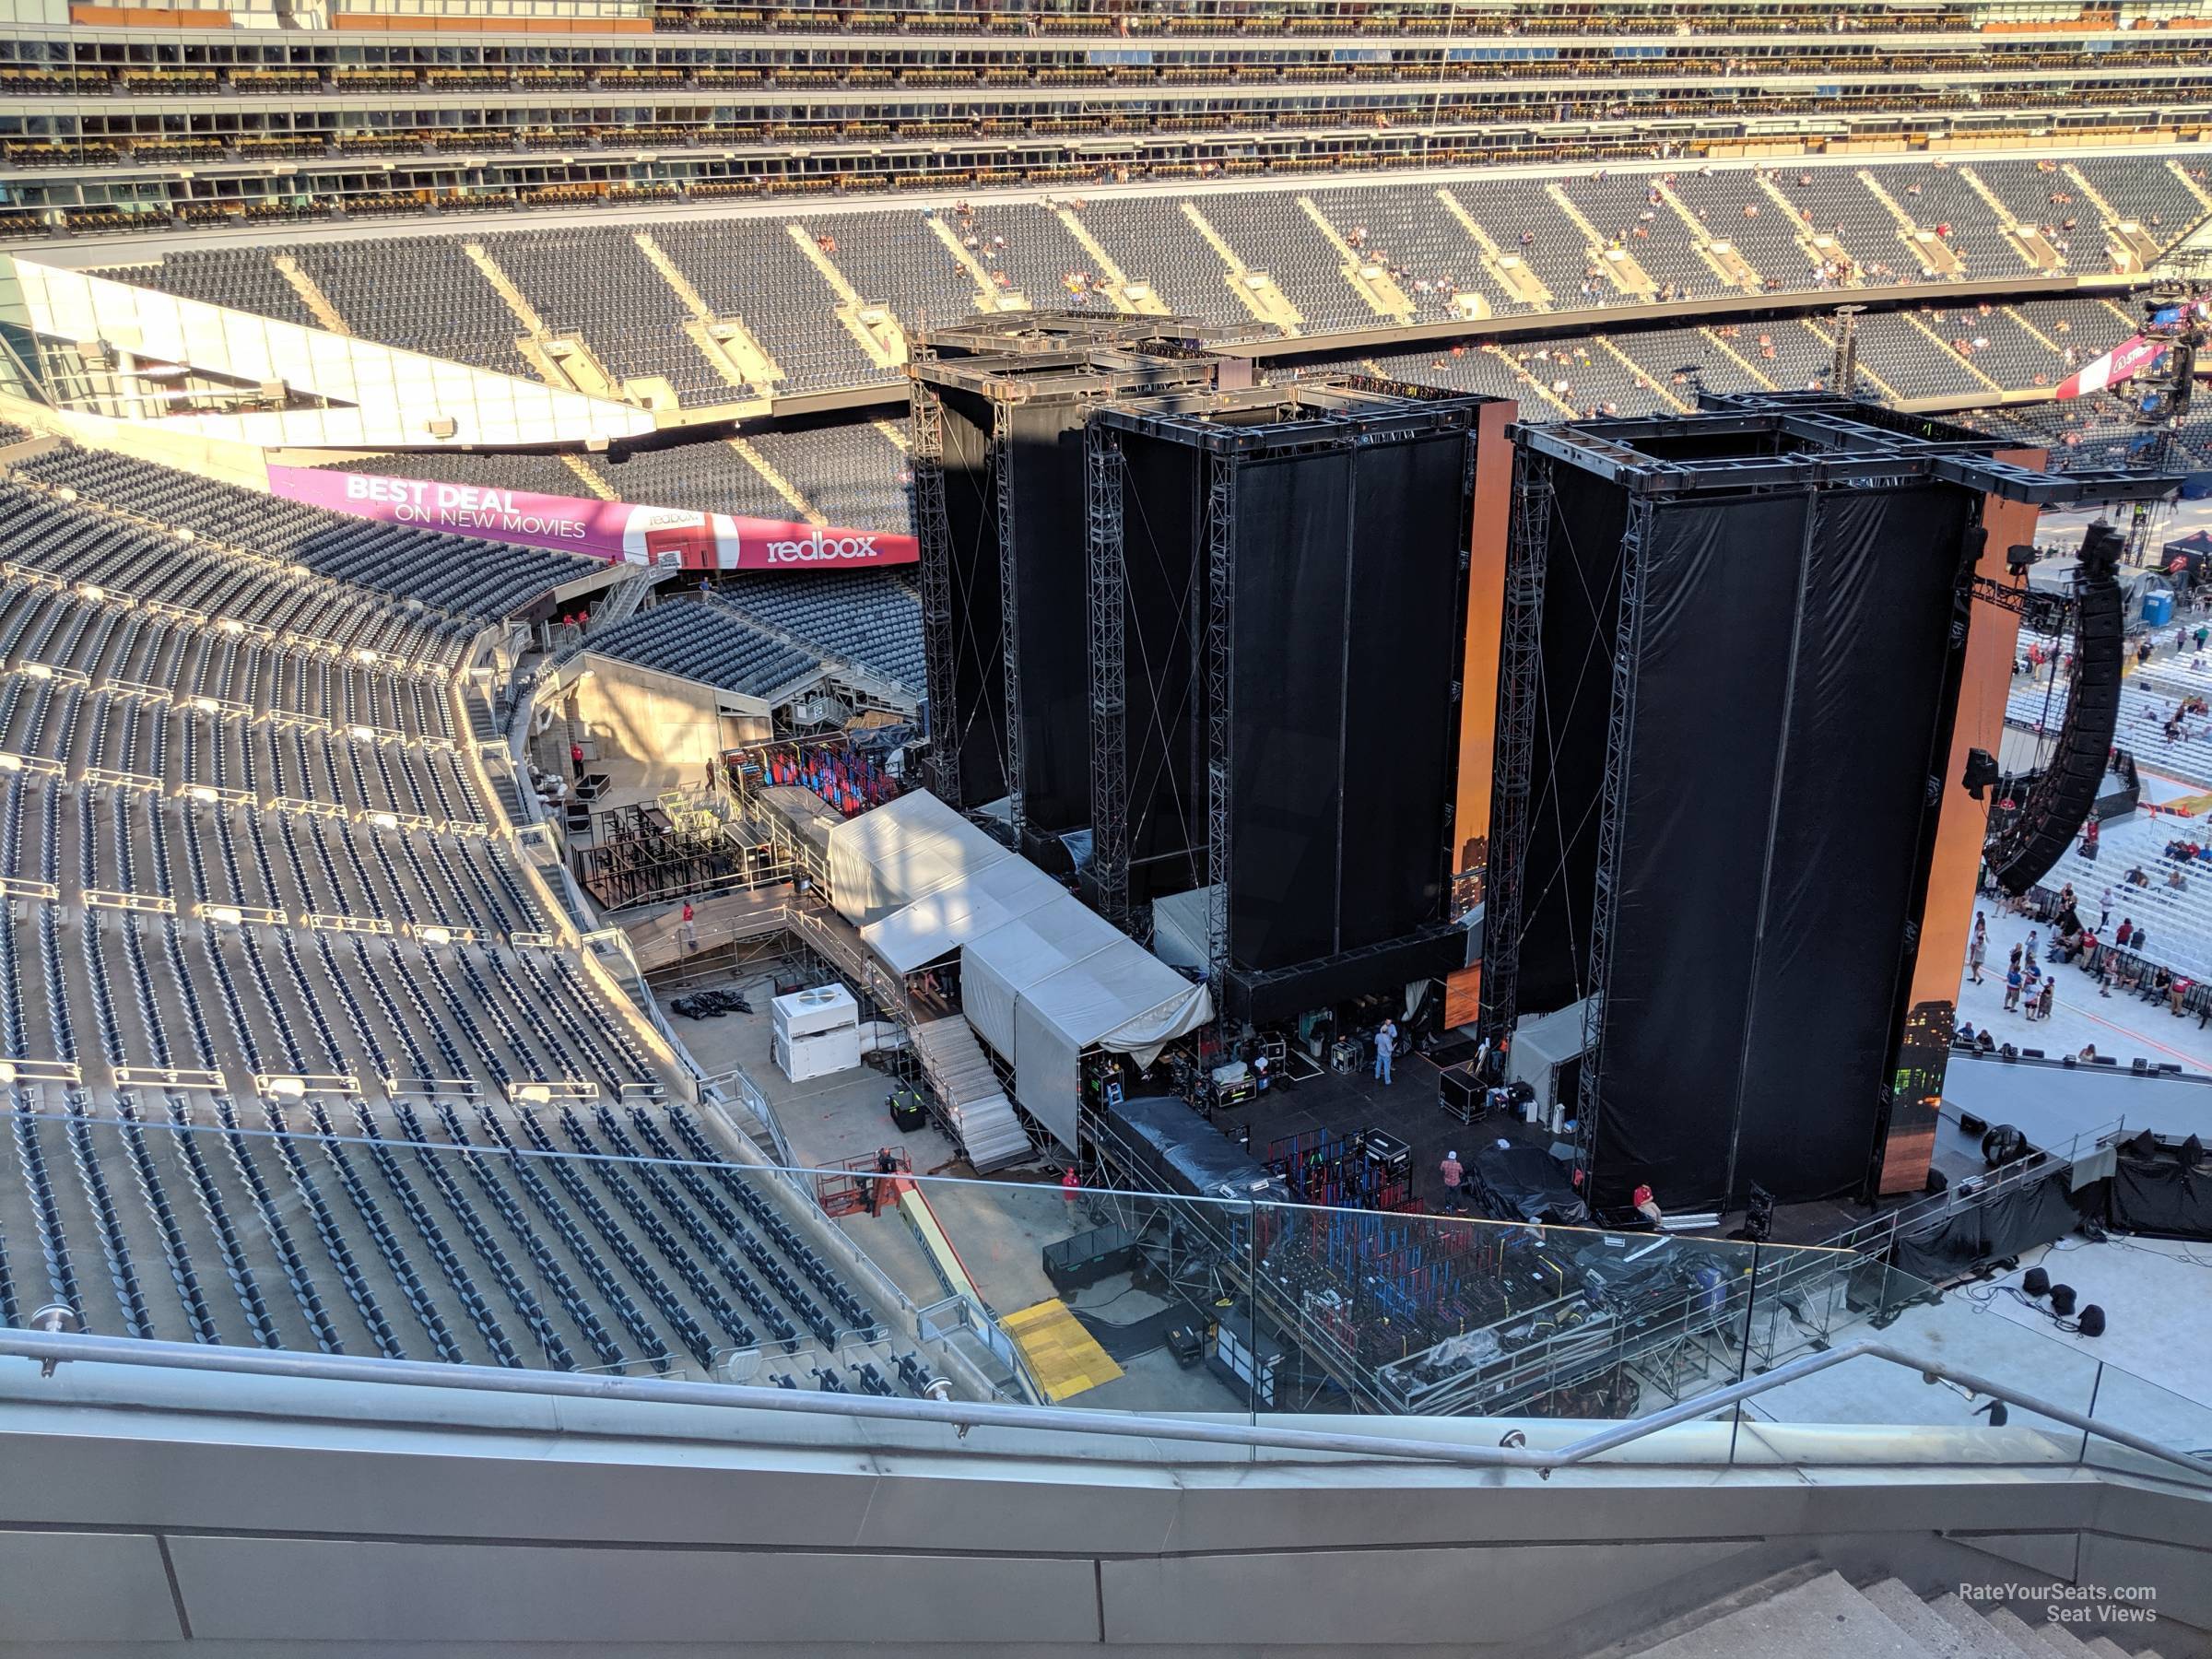 section 446, row 9 seat view  for concert - soldier field